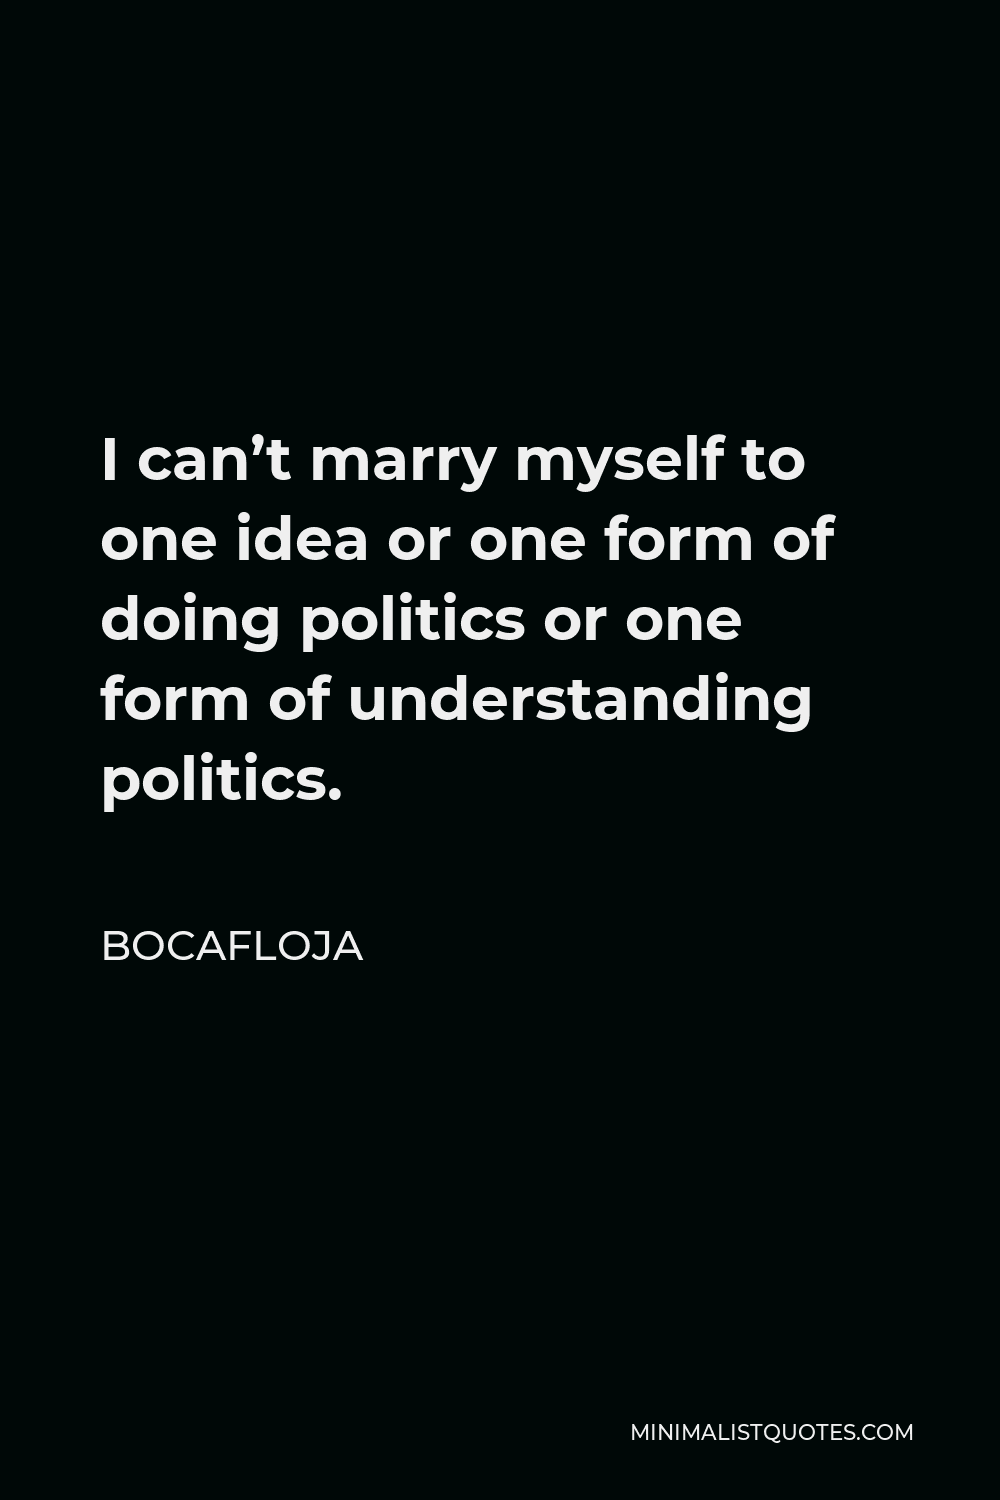 Bocafloja Quote - I can’t marry myself to one idea or one form of doing politics or one form of understanding politics.